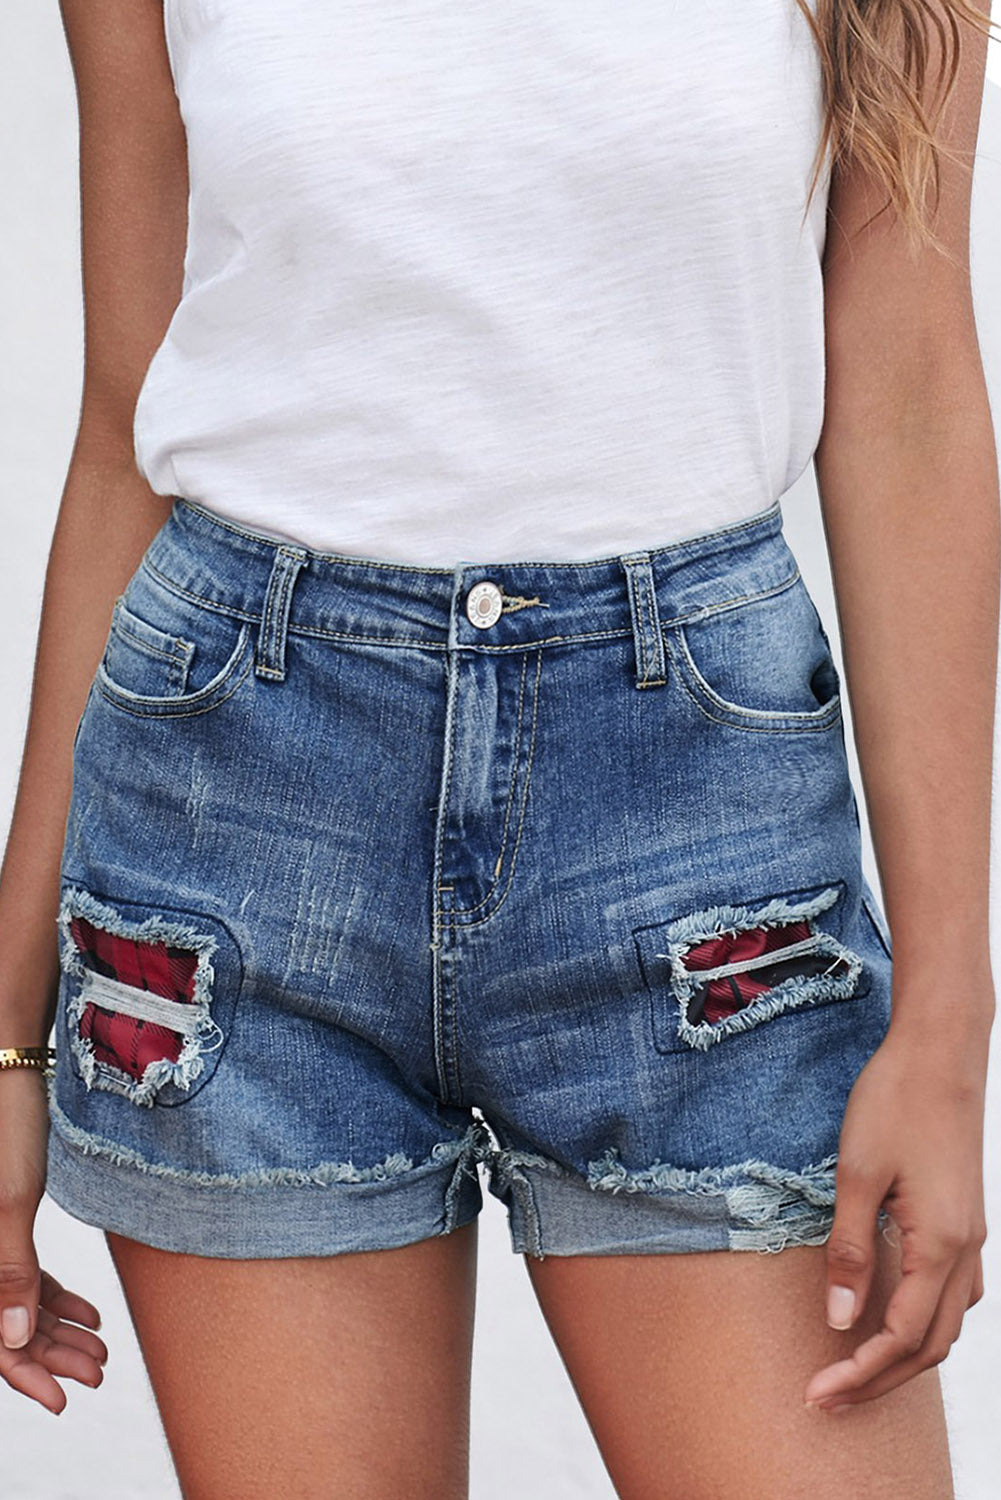 LC78823-3-S, LC78823-3-M, LC78823-3-L, LC78823-3-XL, LC78823-3-2XL, Red Ripped Patchwork Hem Denim Shorts for Women